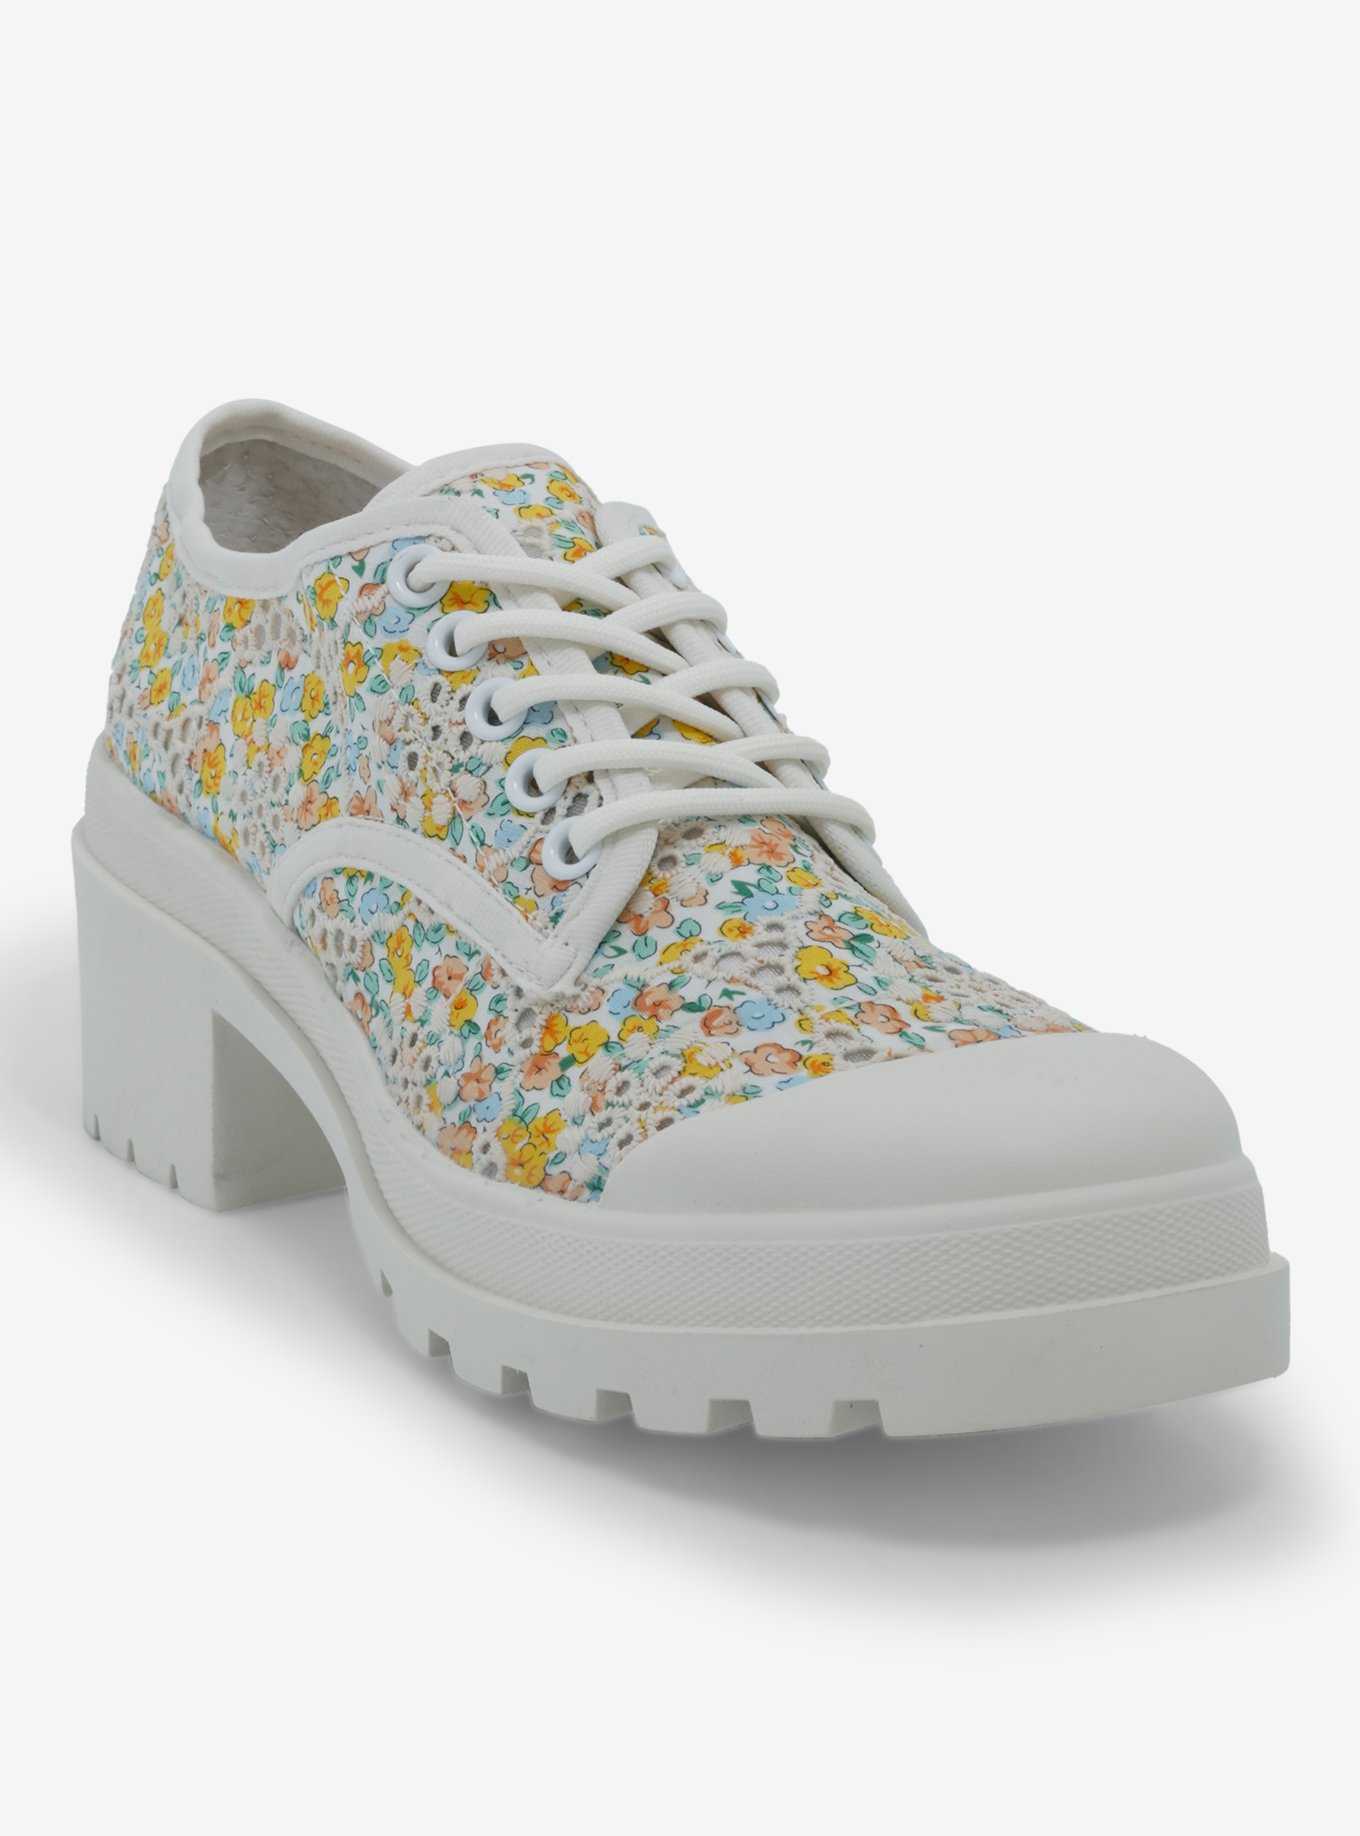 Chinese Laundry Floral Heeled Sneakers, , hi-res